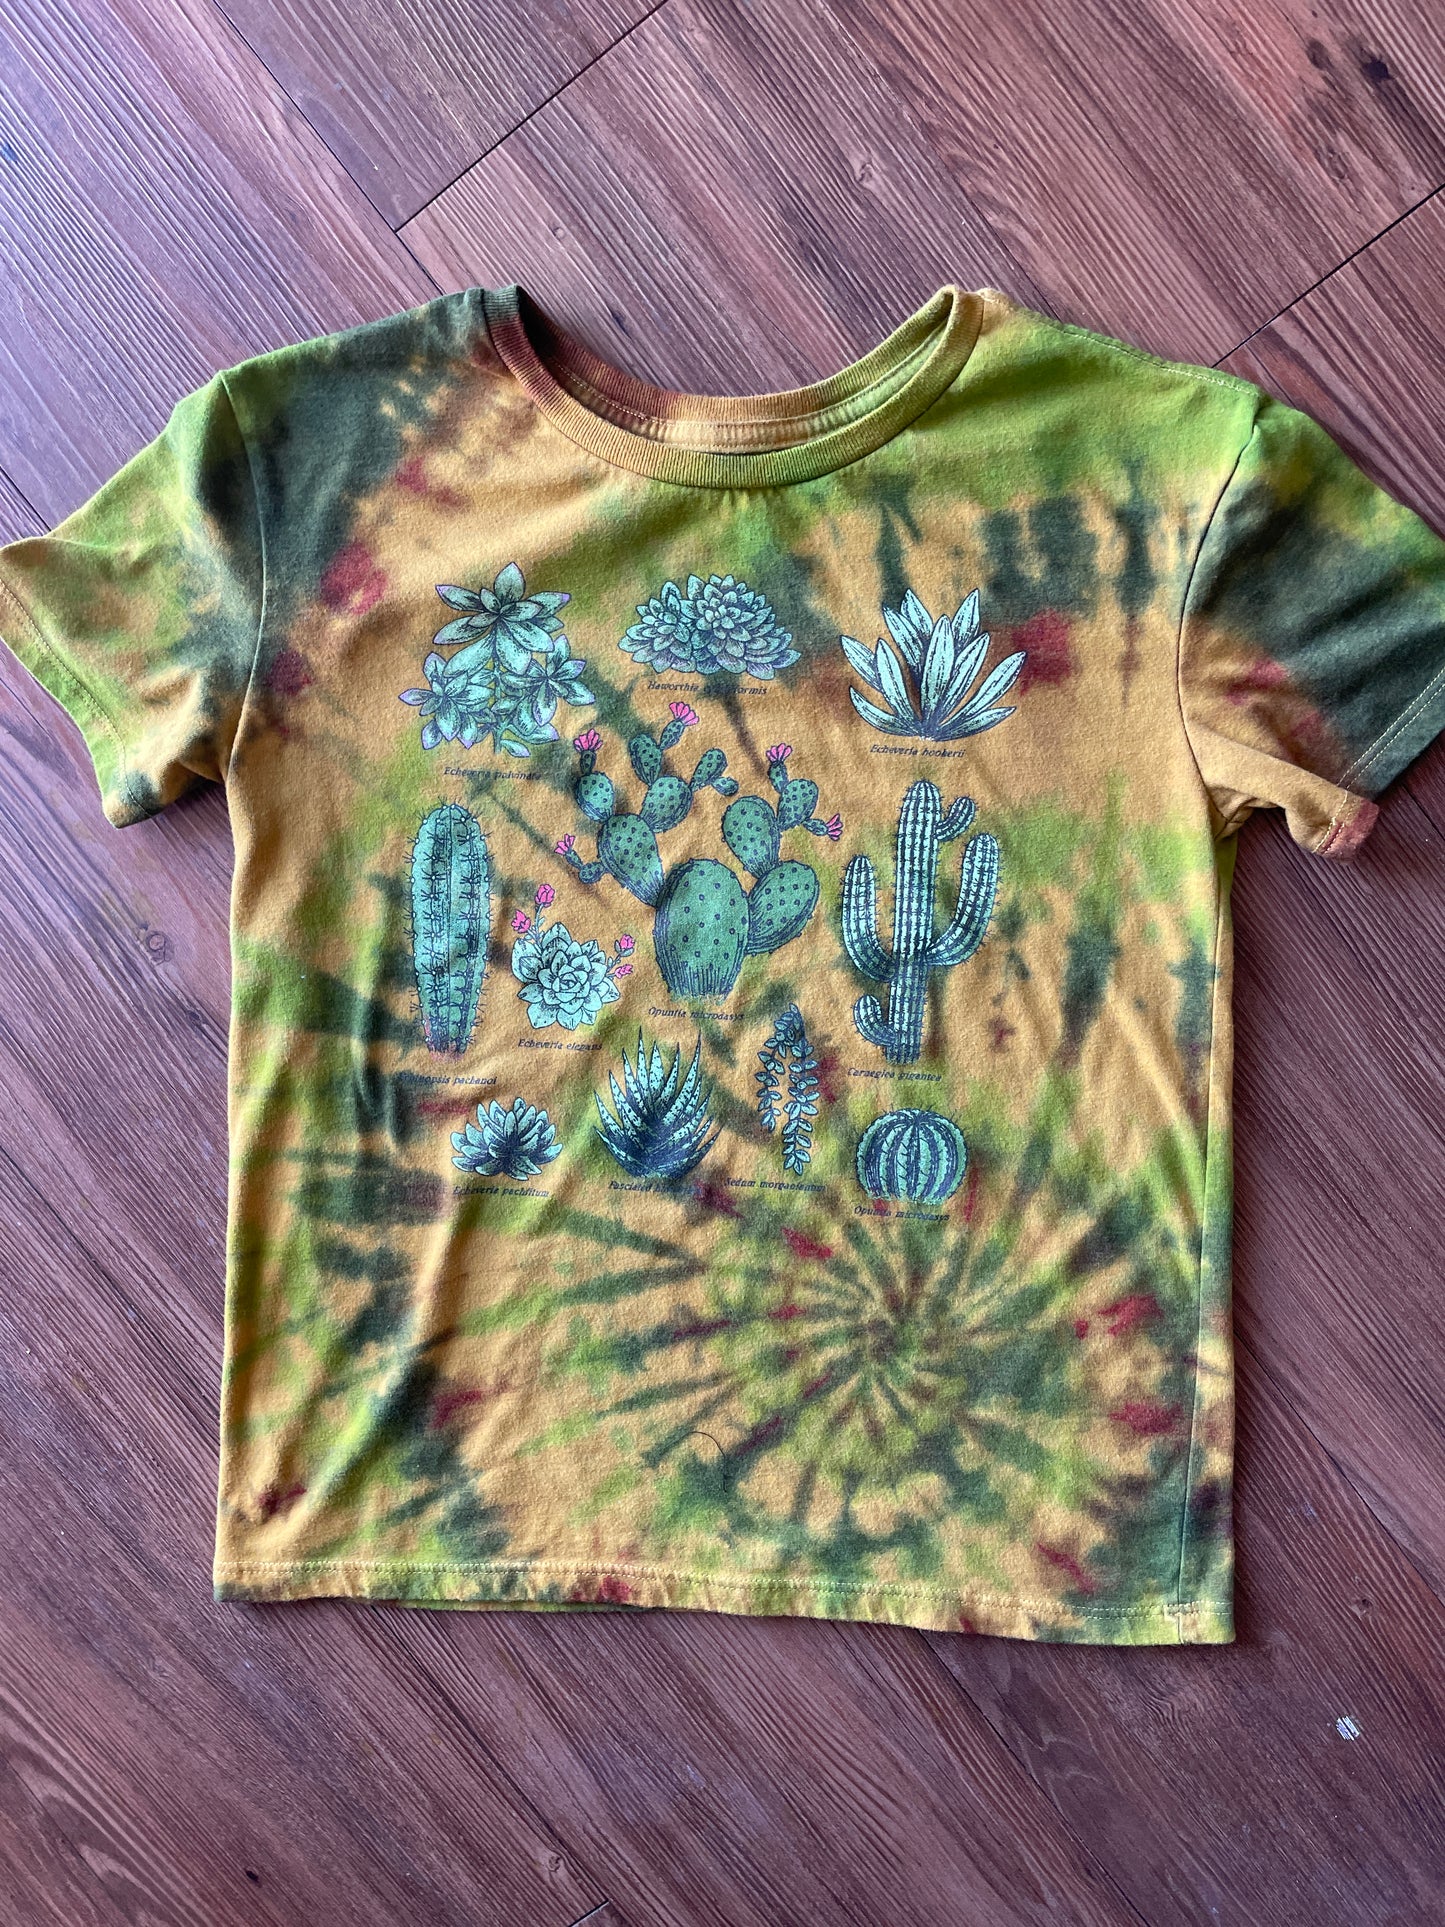 XS/S Women’s Cacti and Desert Plants Handmade Tie Dye T-Shirt | One-Of-a-Kind Yellow and Green Spiral Short Sleeve